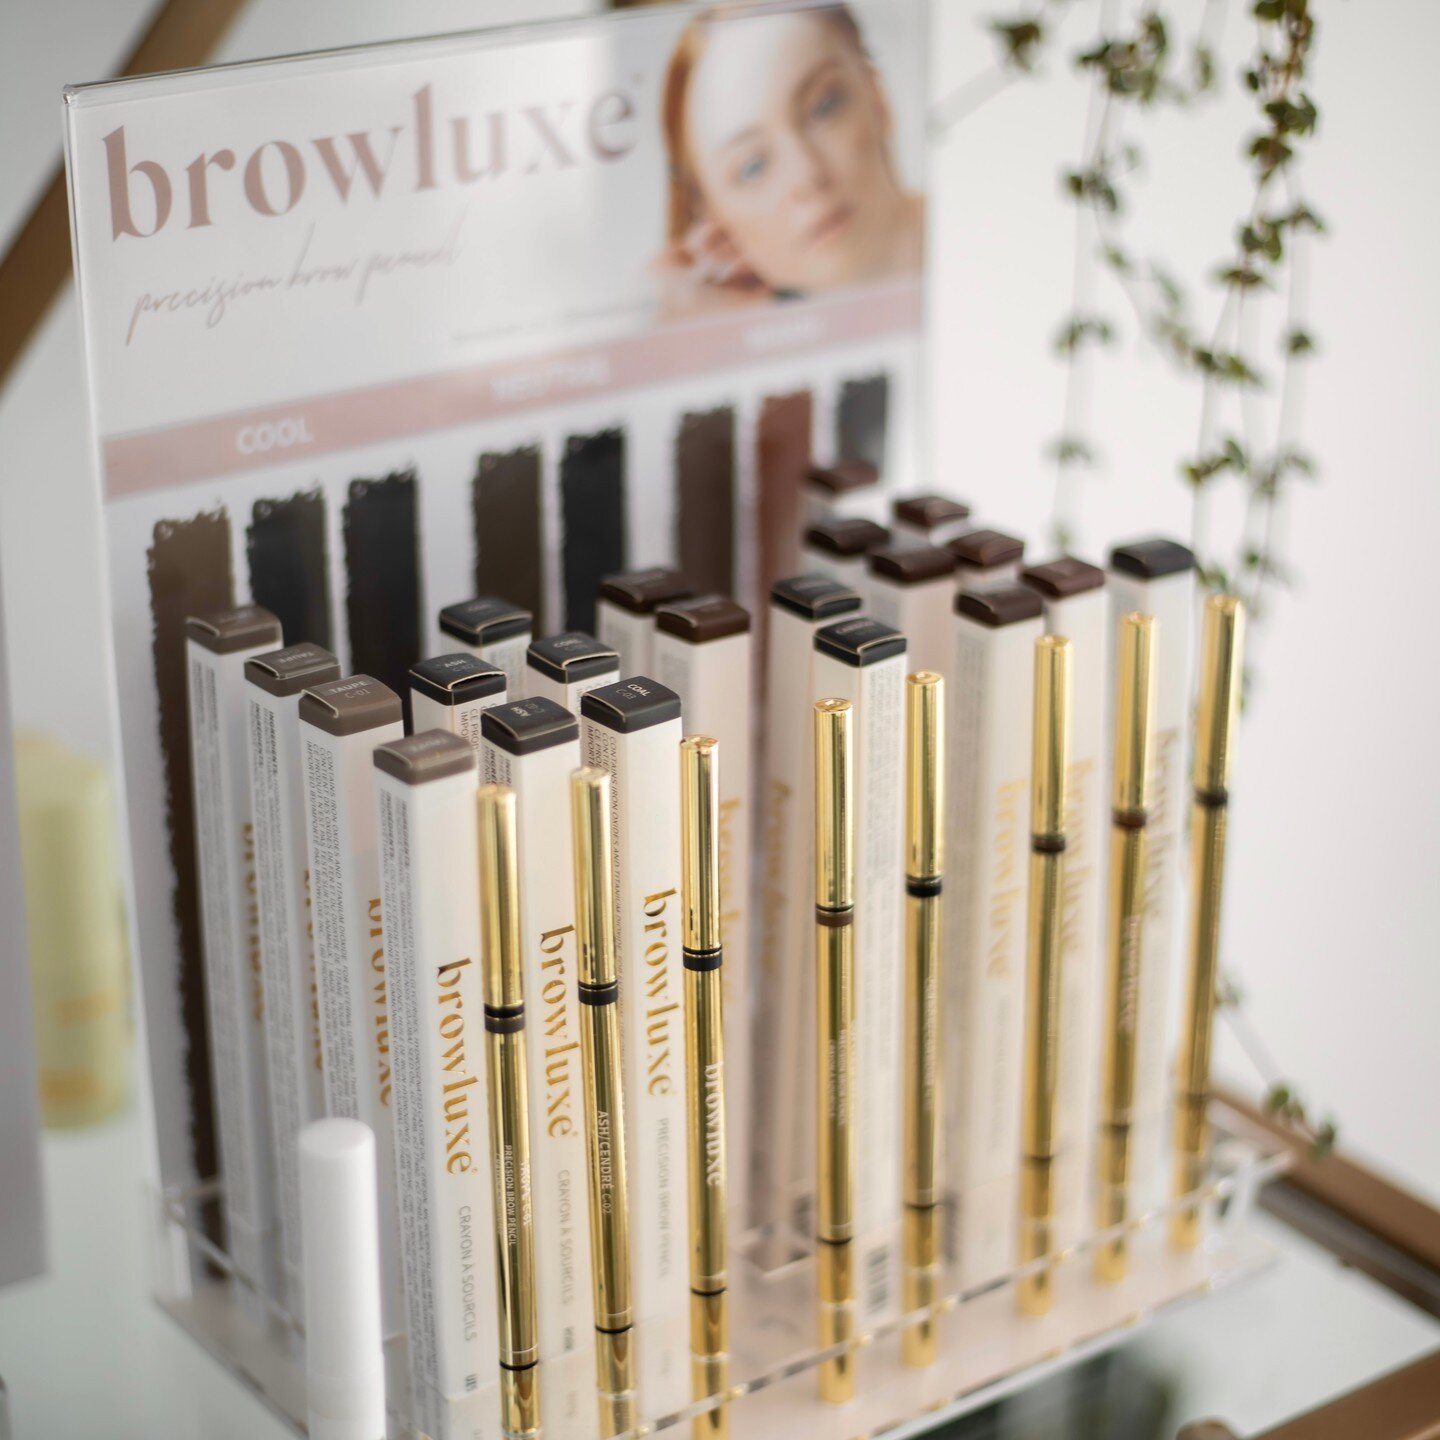 Browluxe is Polina's favourite brow pencil company. Why? ⁣
⁣
1) brow only brand that developed their colours and formulas from their own brow studio.⁣
⁣
2) will stay on until you don&rsquo;t want it to. Harder pencil formula makes the pigment last lo